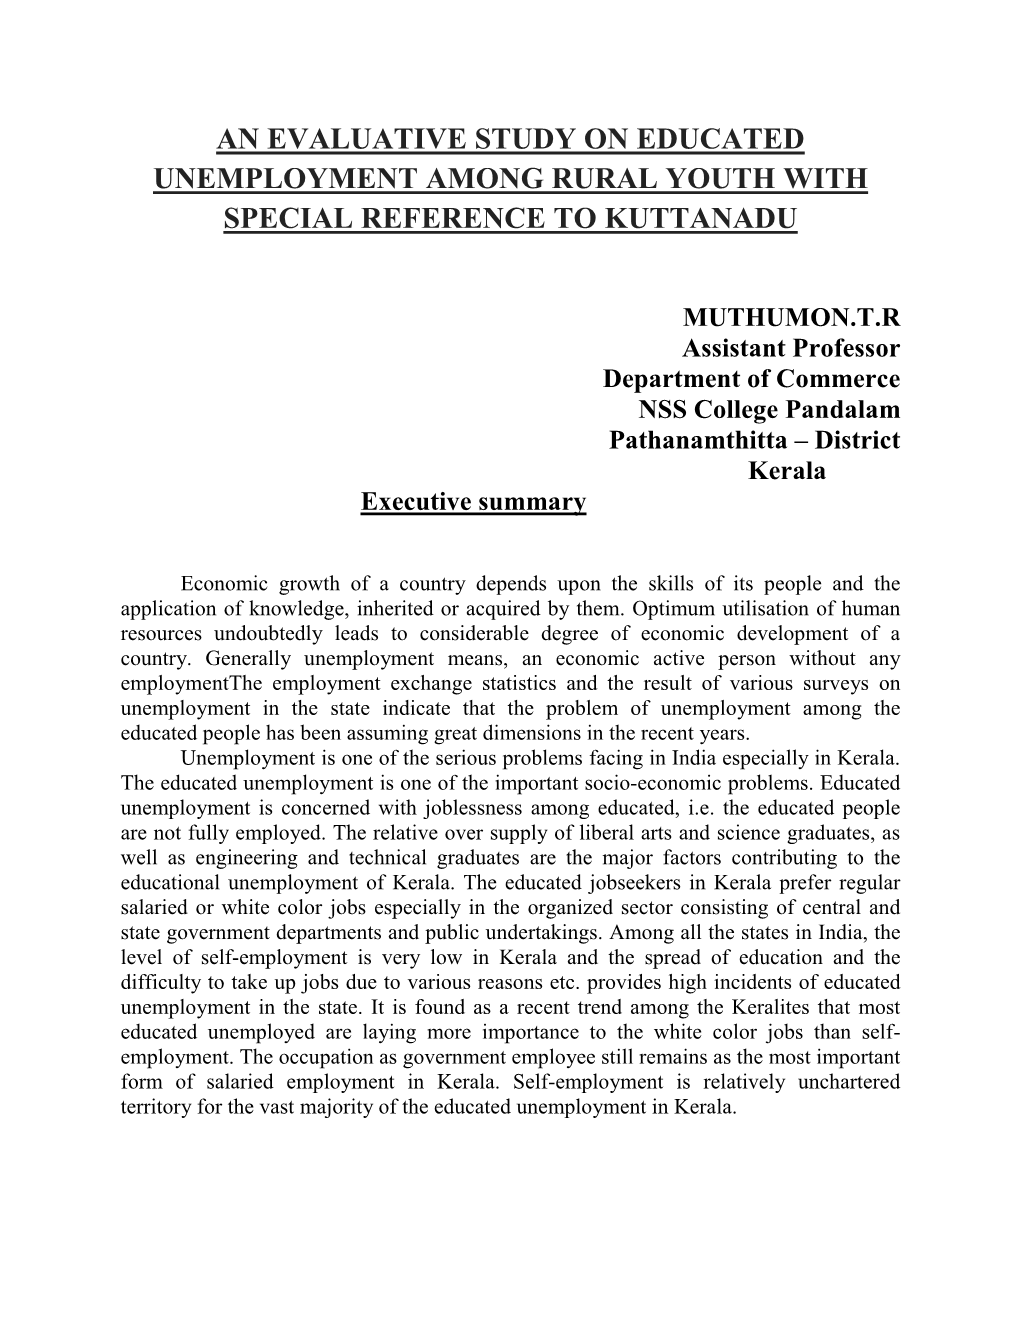 An Evaluative Study on Educated Unemployment Among Rural Youth with Special Reference to Kuttanadu